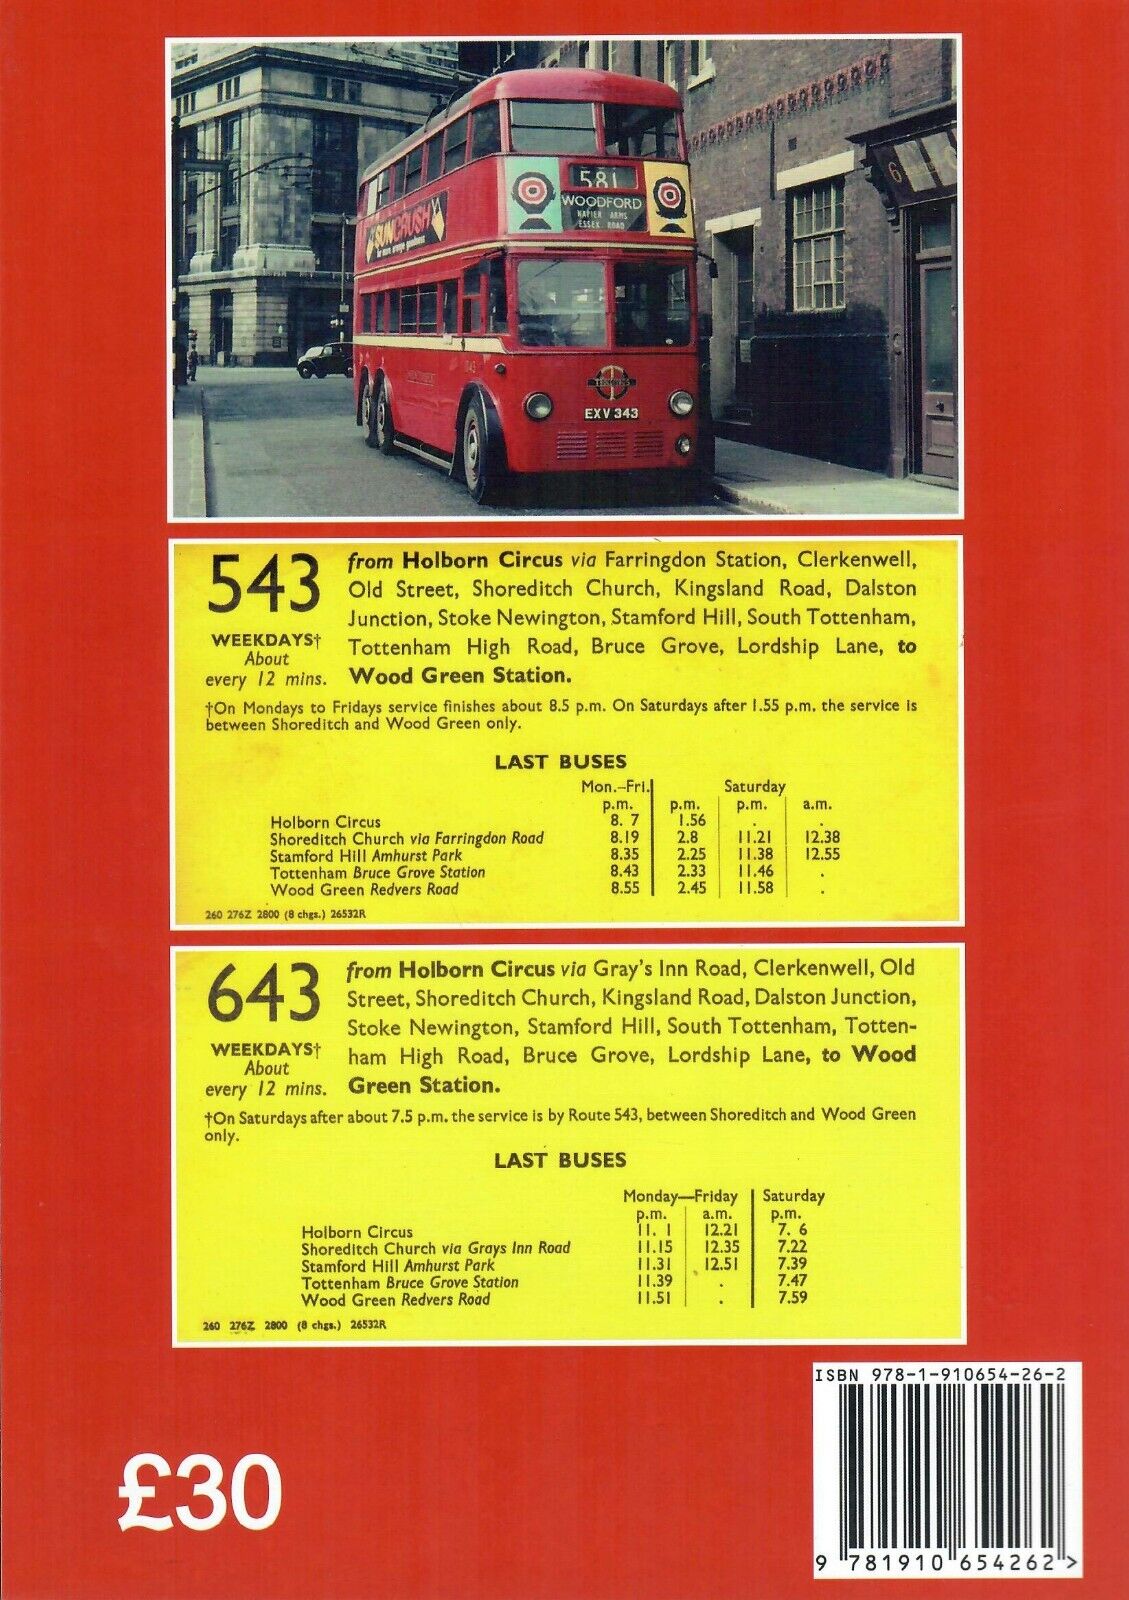 Trolleybuses in East Central London